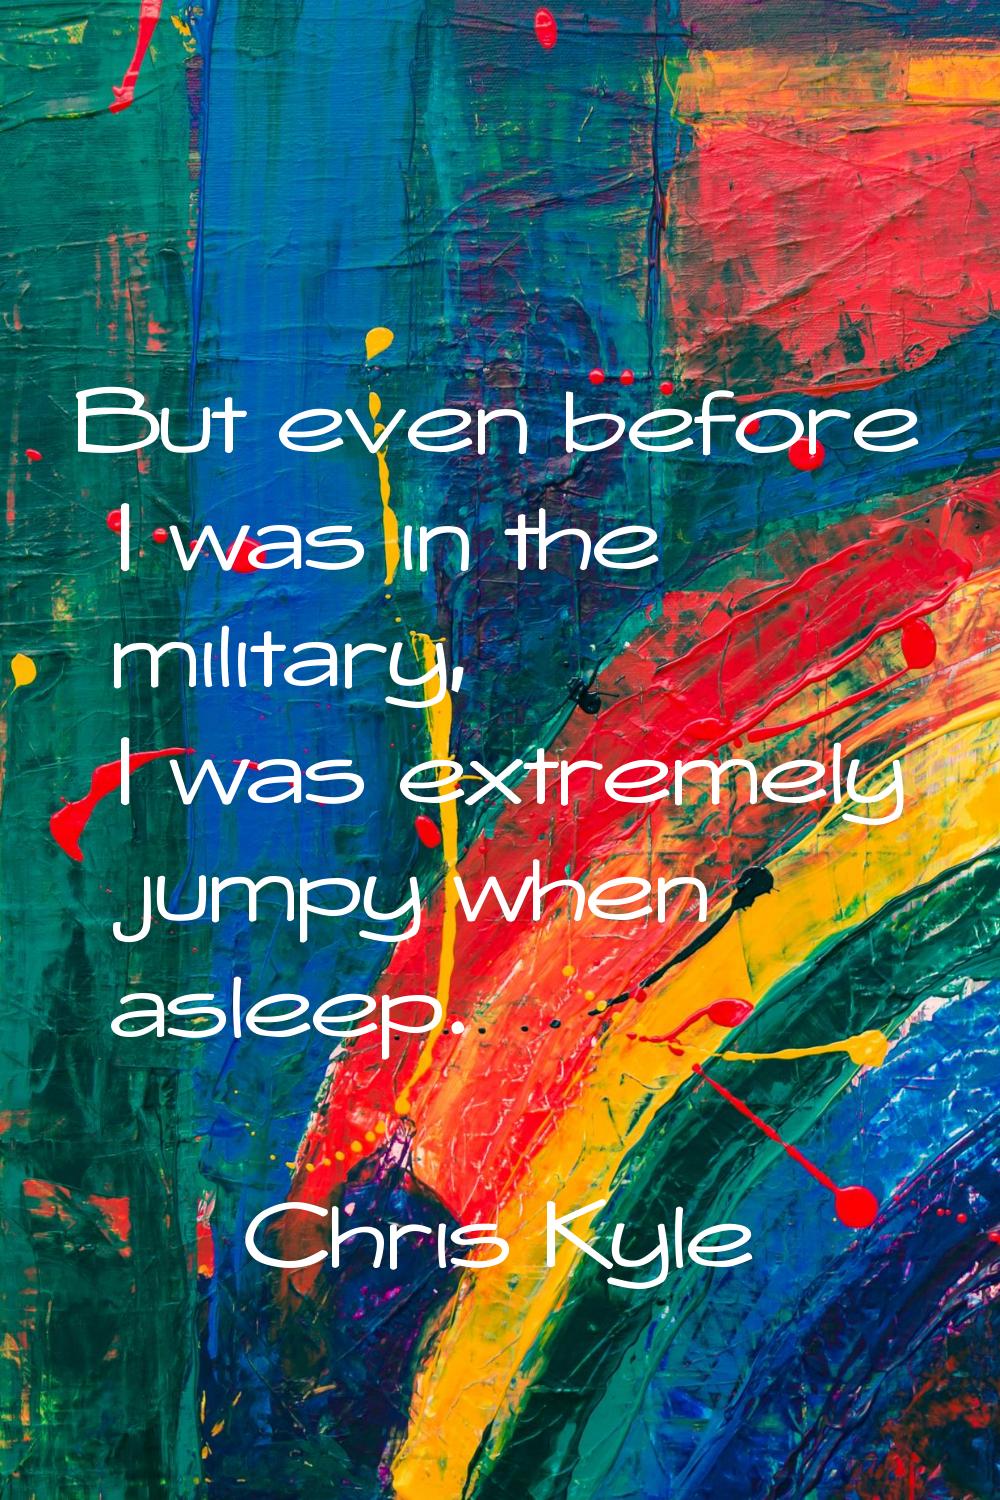 But even before I was in the military, I was extremely jumpy when asleep.